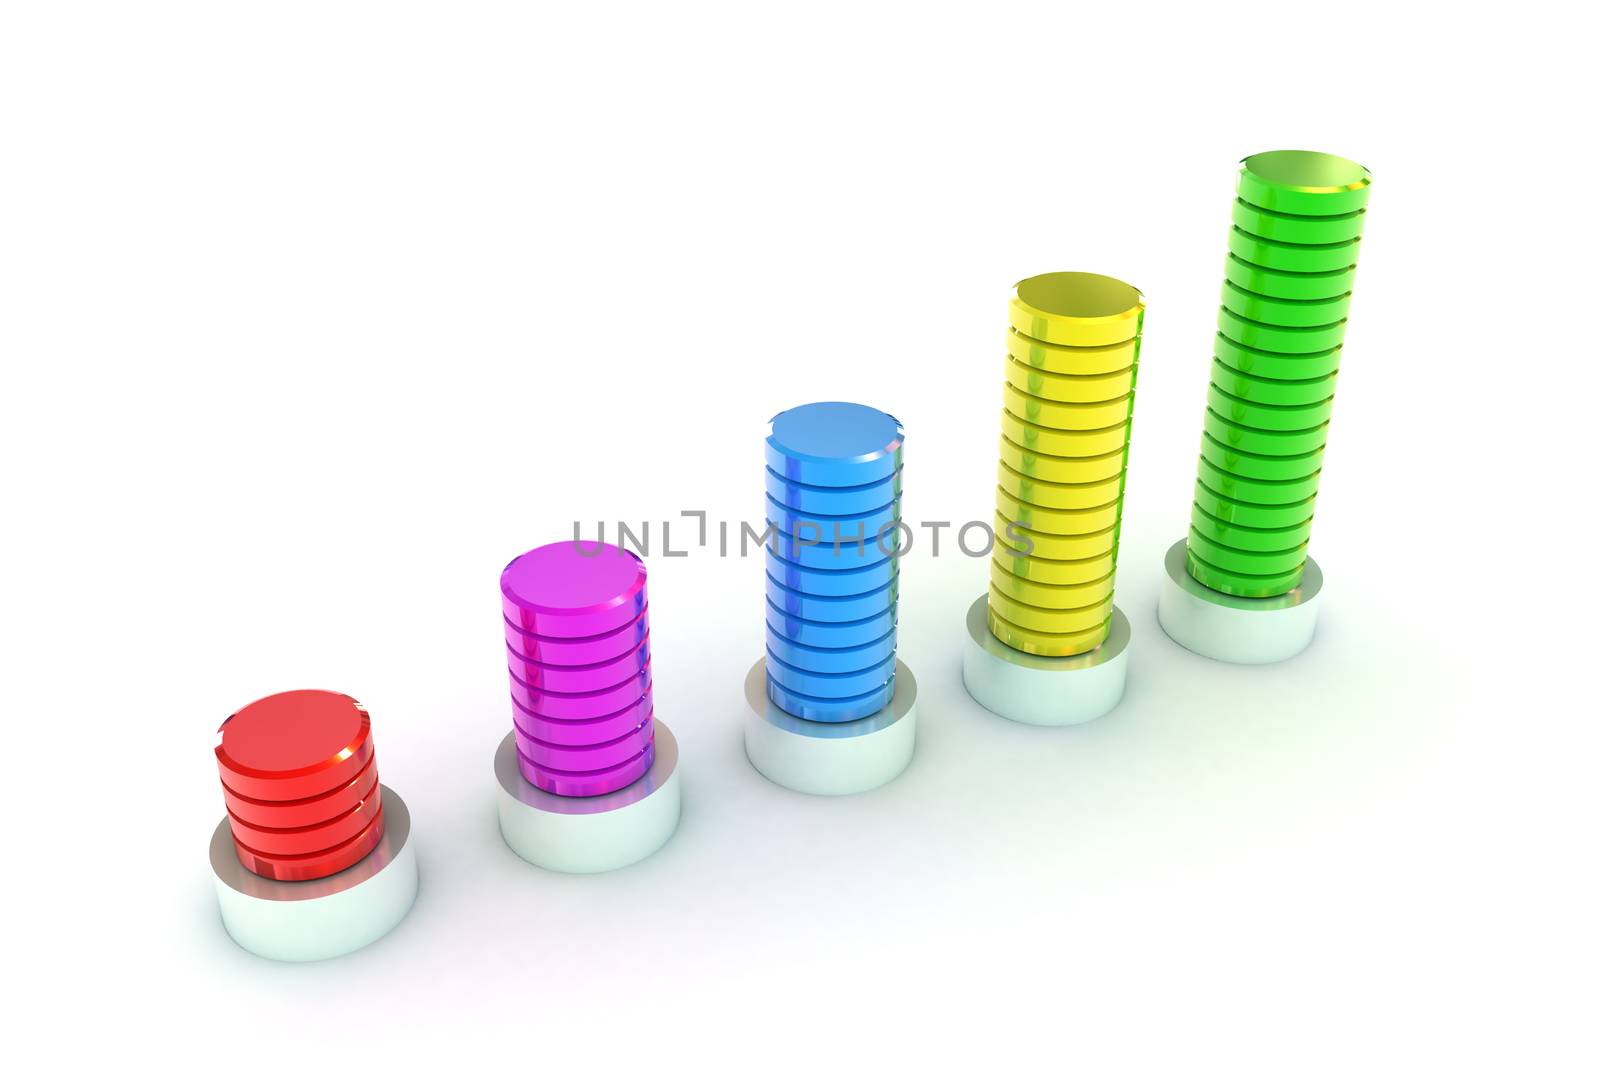 A Colourful 3d Rendered Bar Chart Illustration